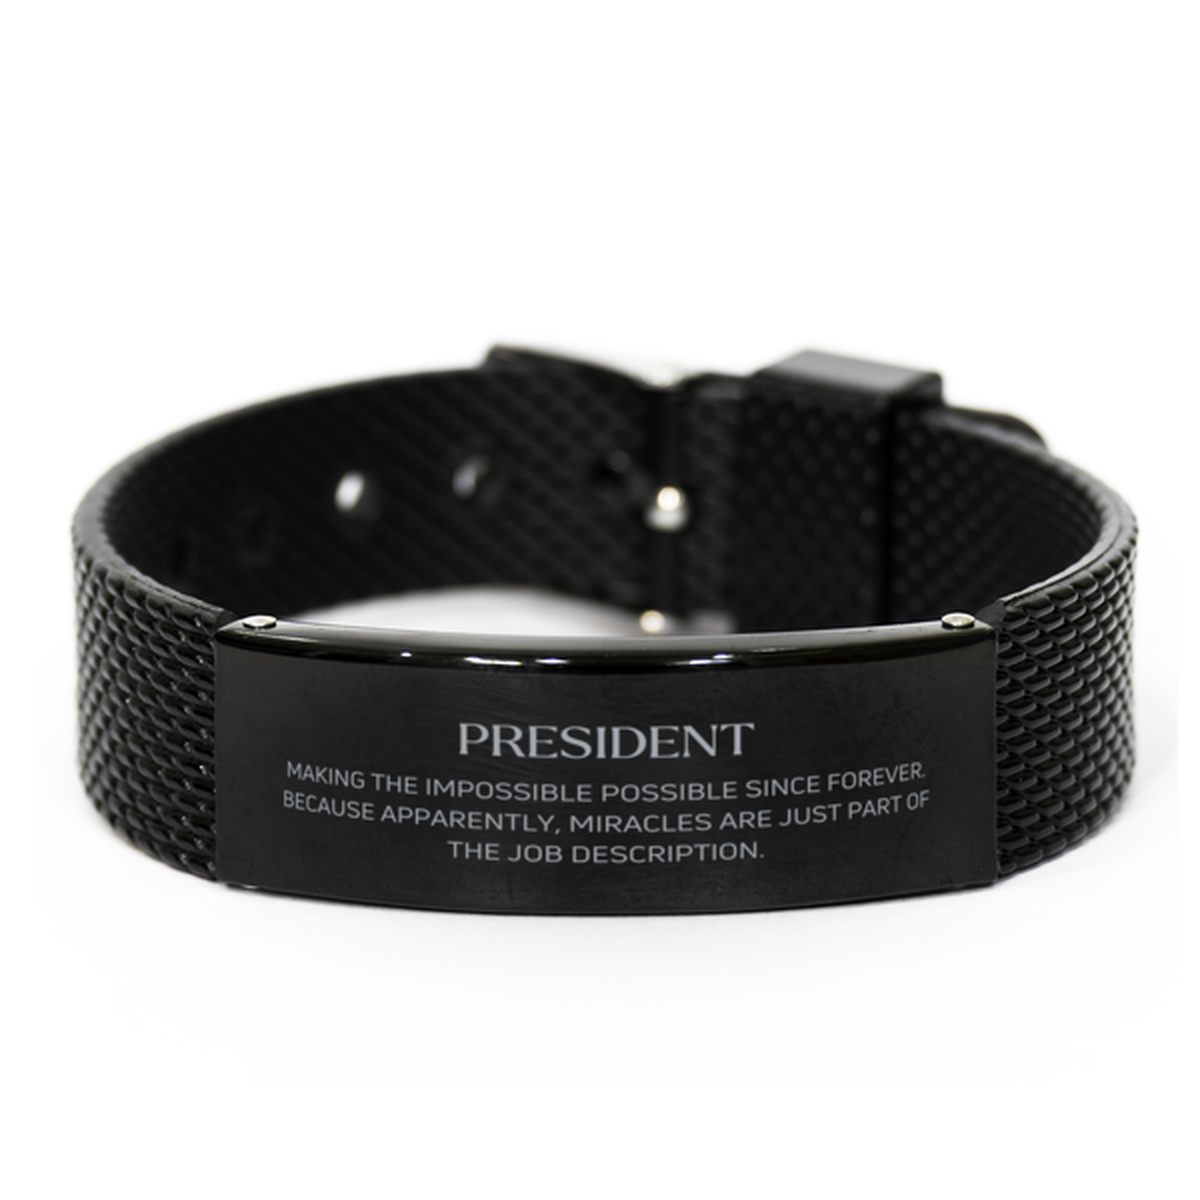 Funny President Gifts, Miracles are just part of the job description, Inspirational Birthday Black Shark Mesh Bracelet For President, Men, Women, Coworkers, Friends, Boss